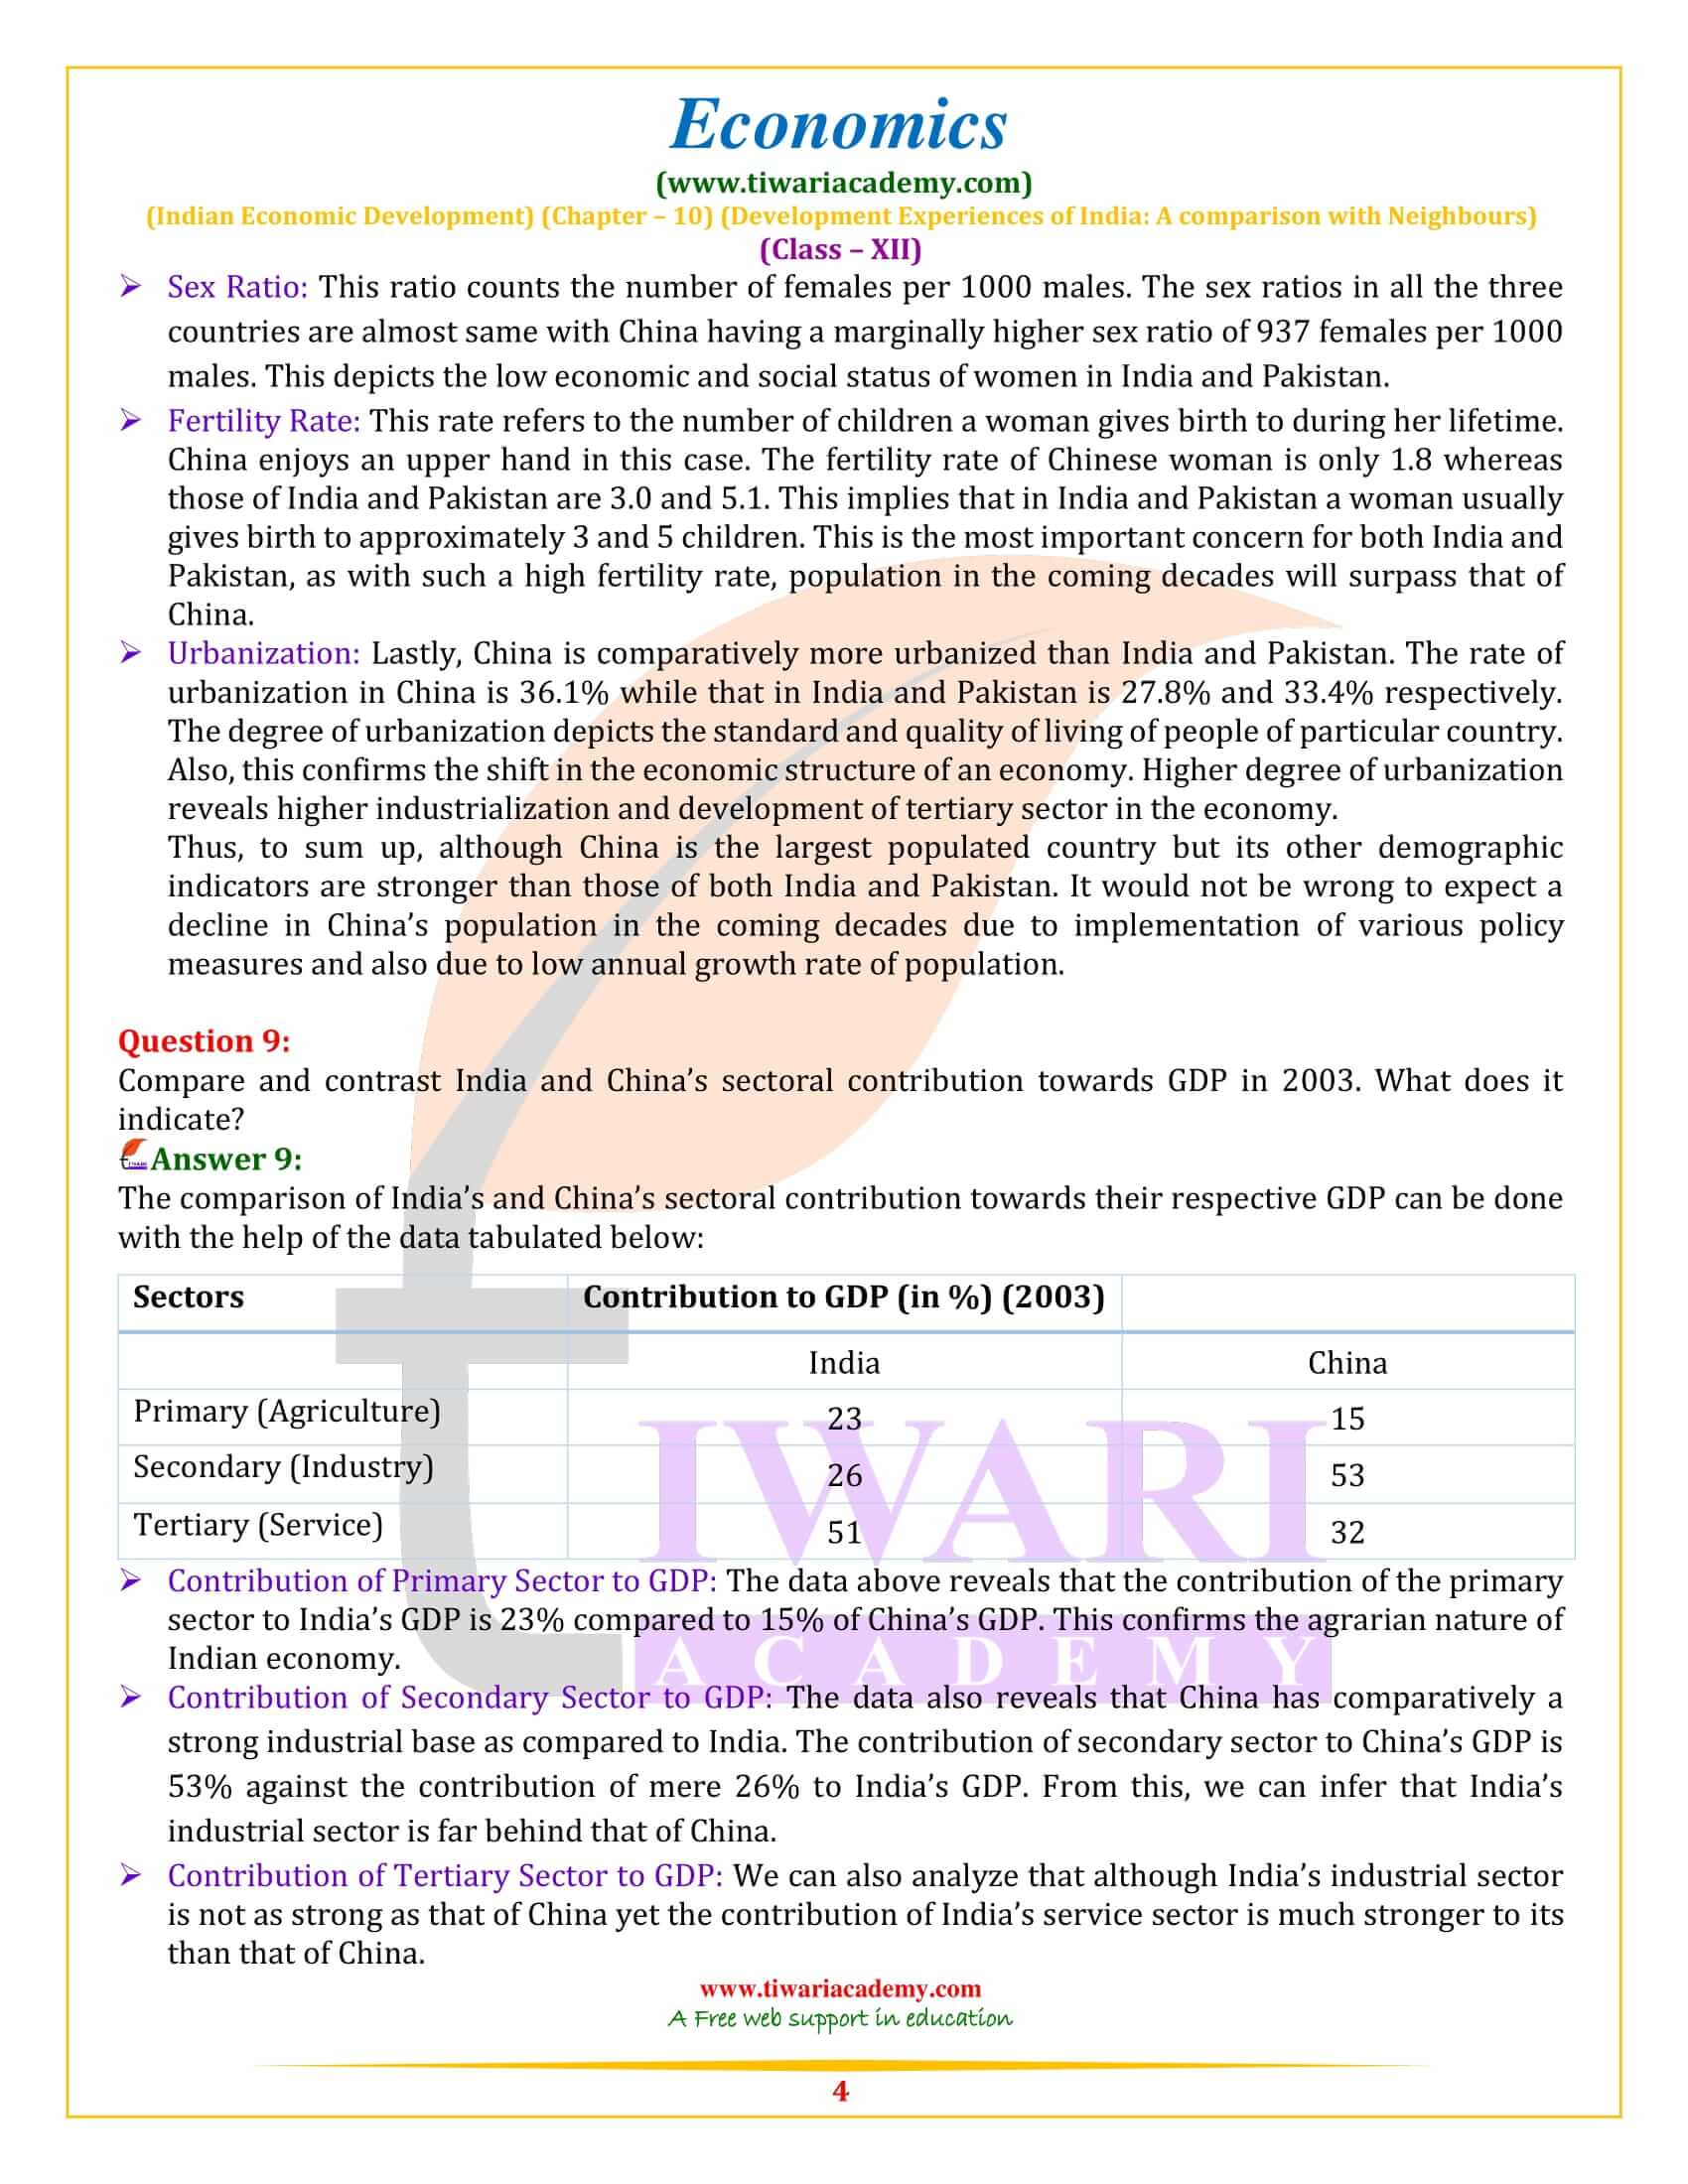 NCERT Solutions for Class 12 Indian Economic Development Chapter 10 exercises answers